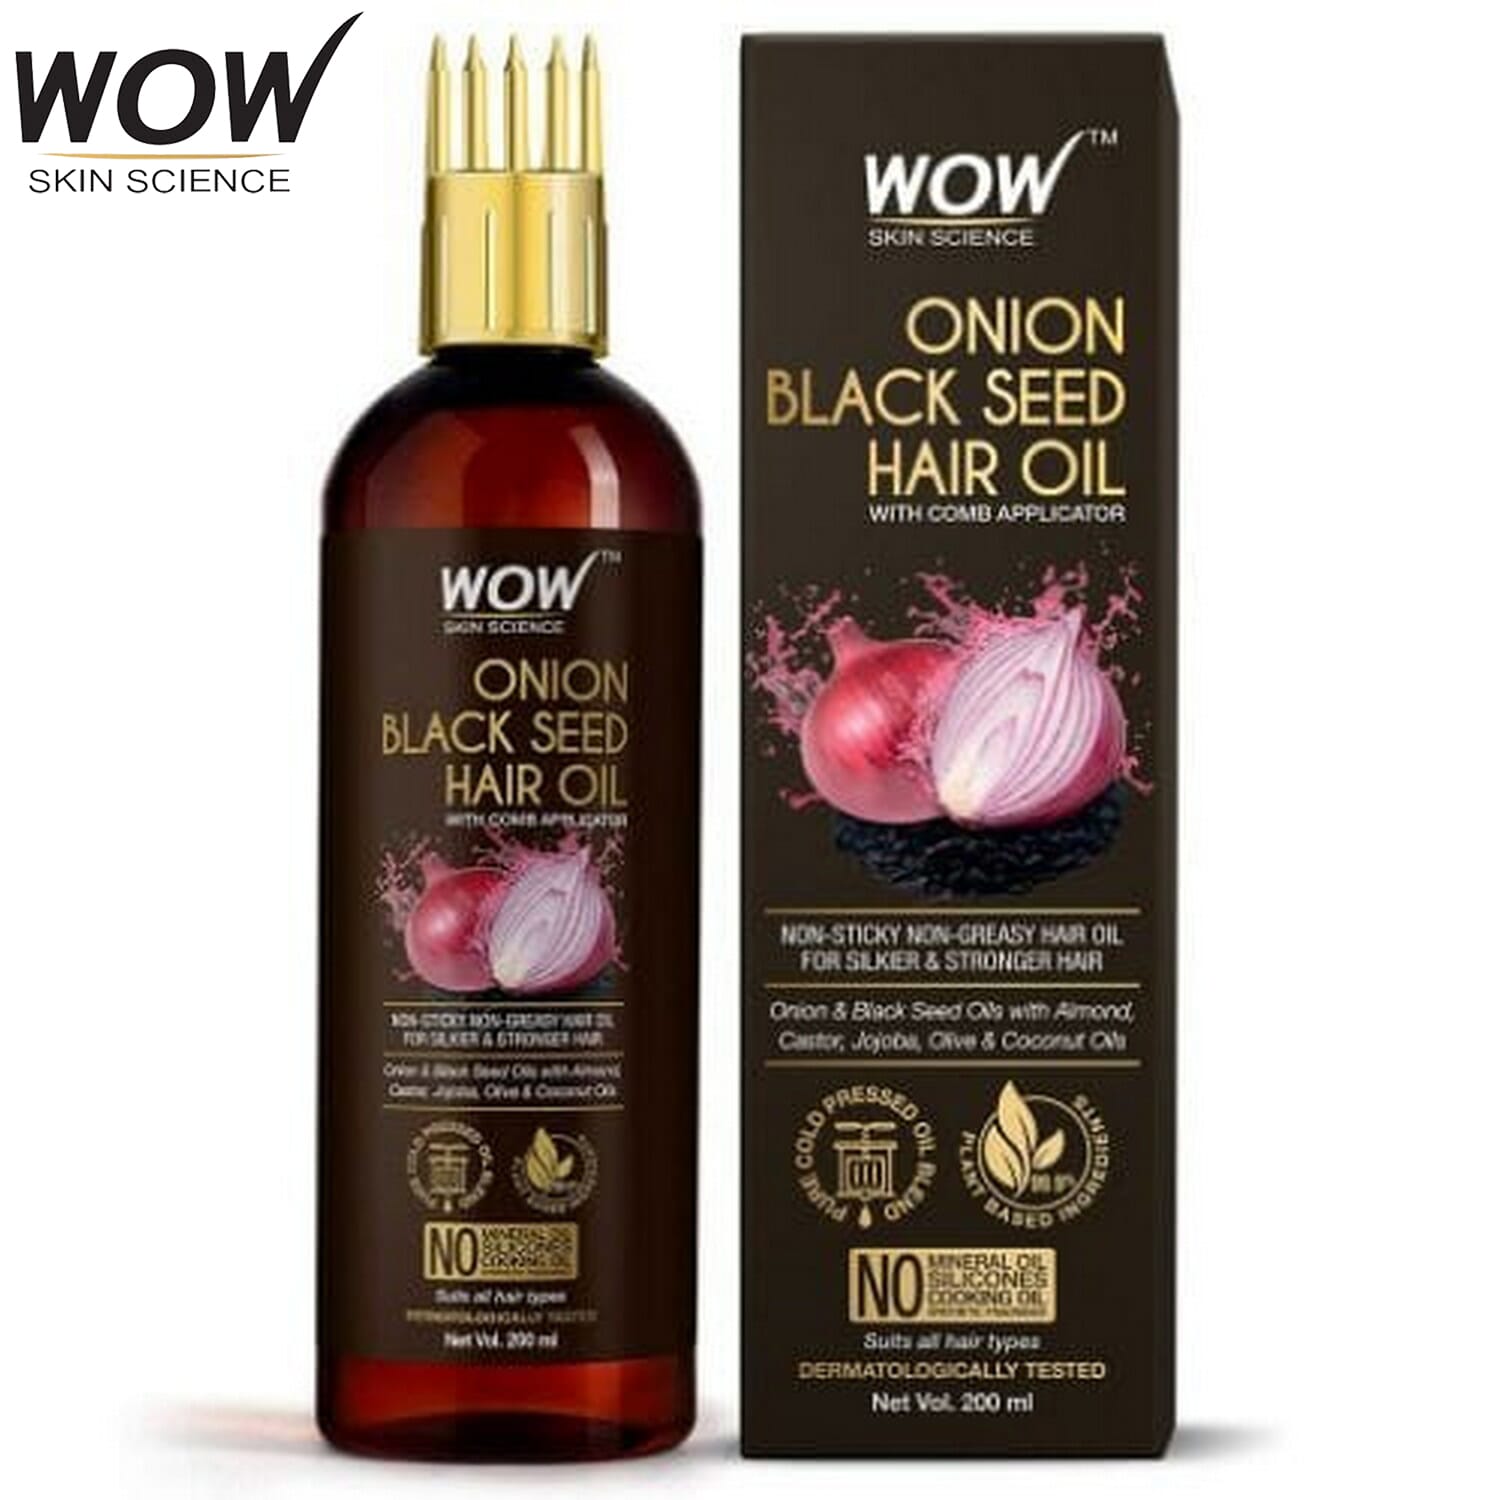 wow science onion black seed hair oil with comb 200ml